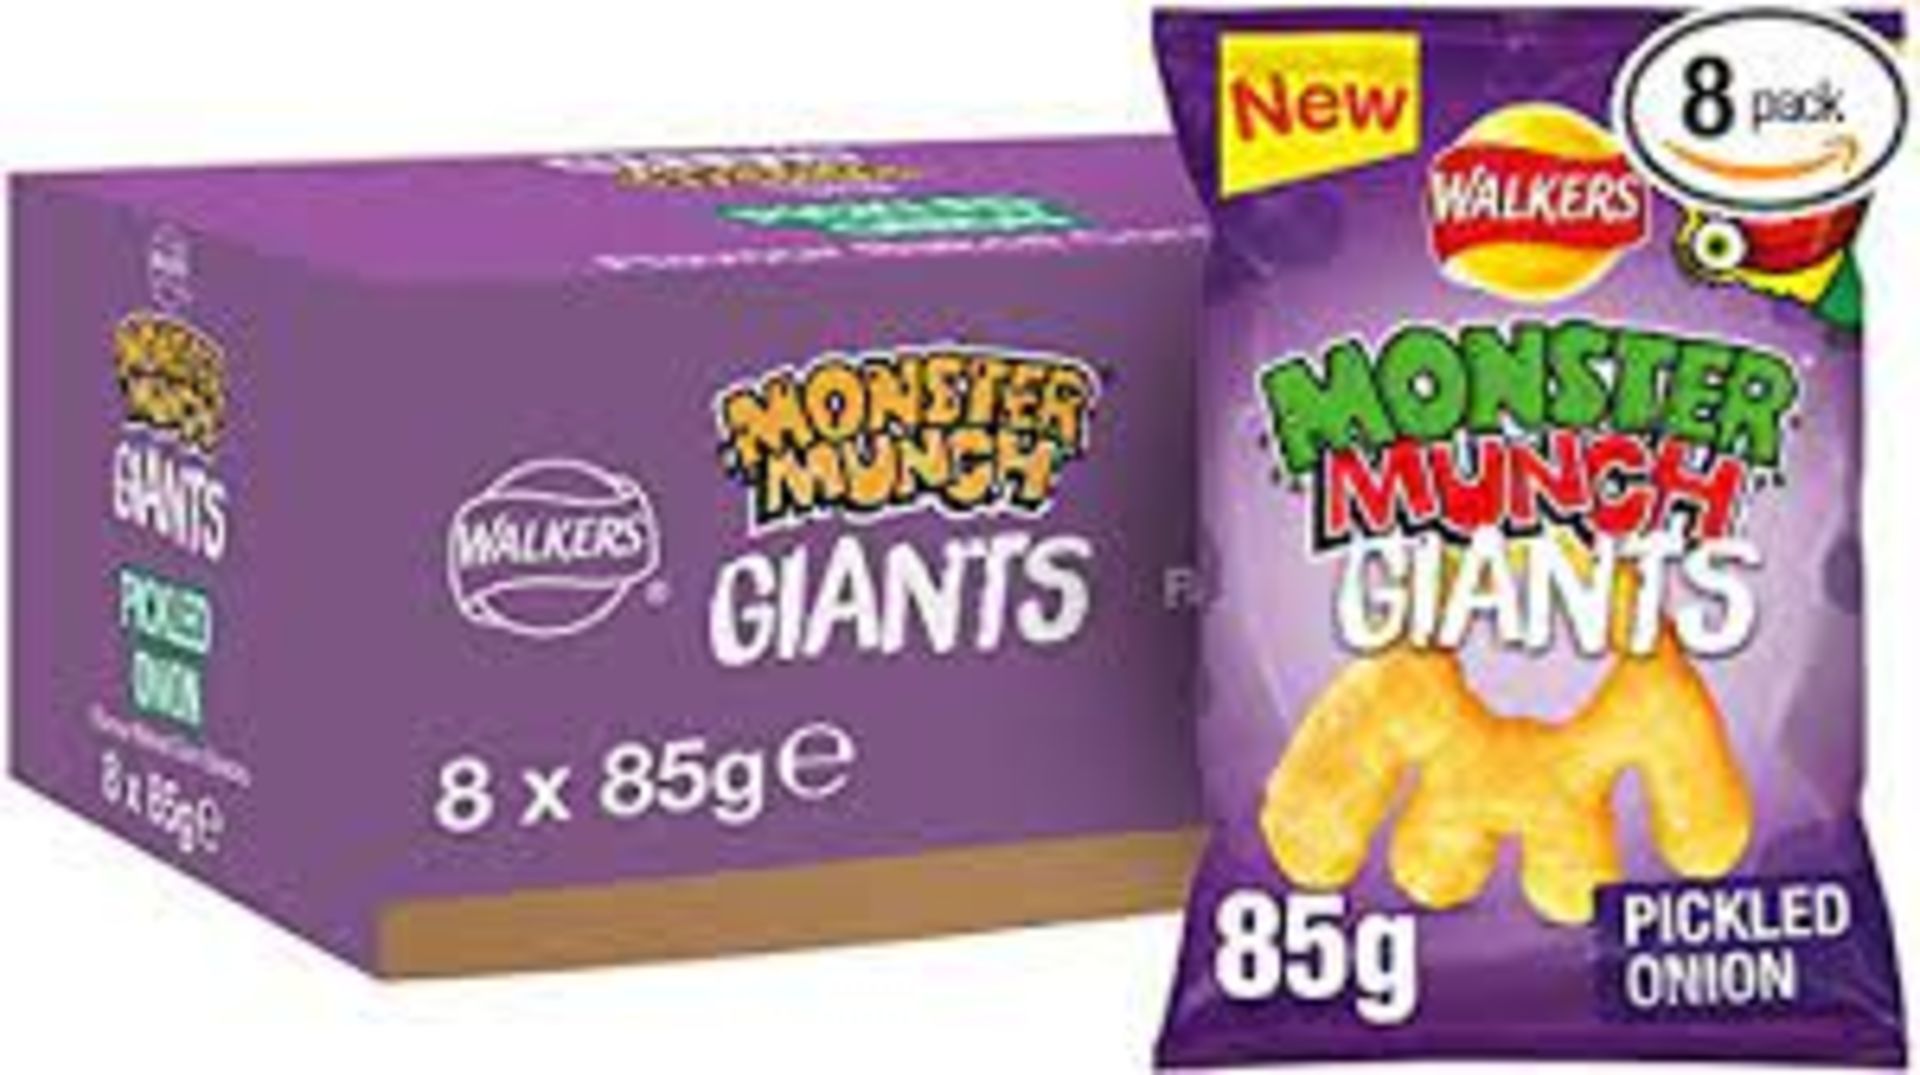 RRP £336 (Approx. Count 24) spSNJ21SNVp 24 x Walkers Monster Munch Giants Pickled Onion 85g (Case of